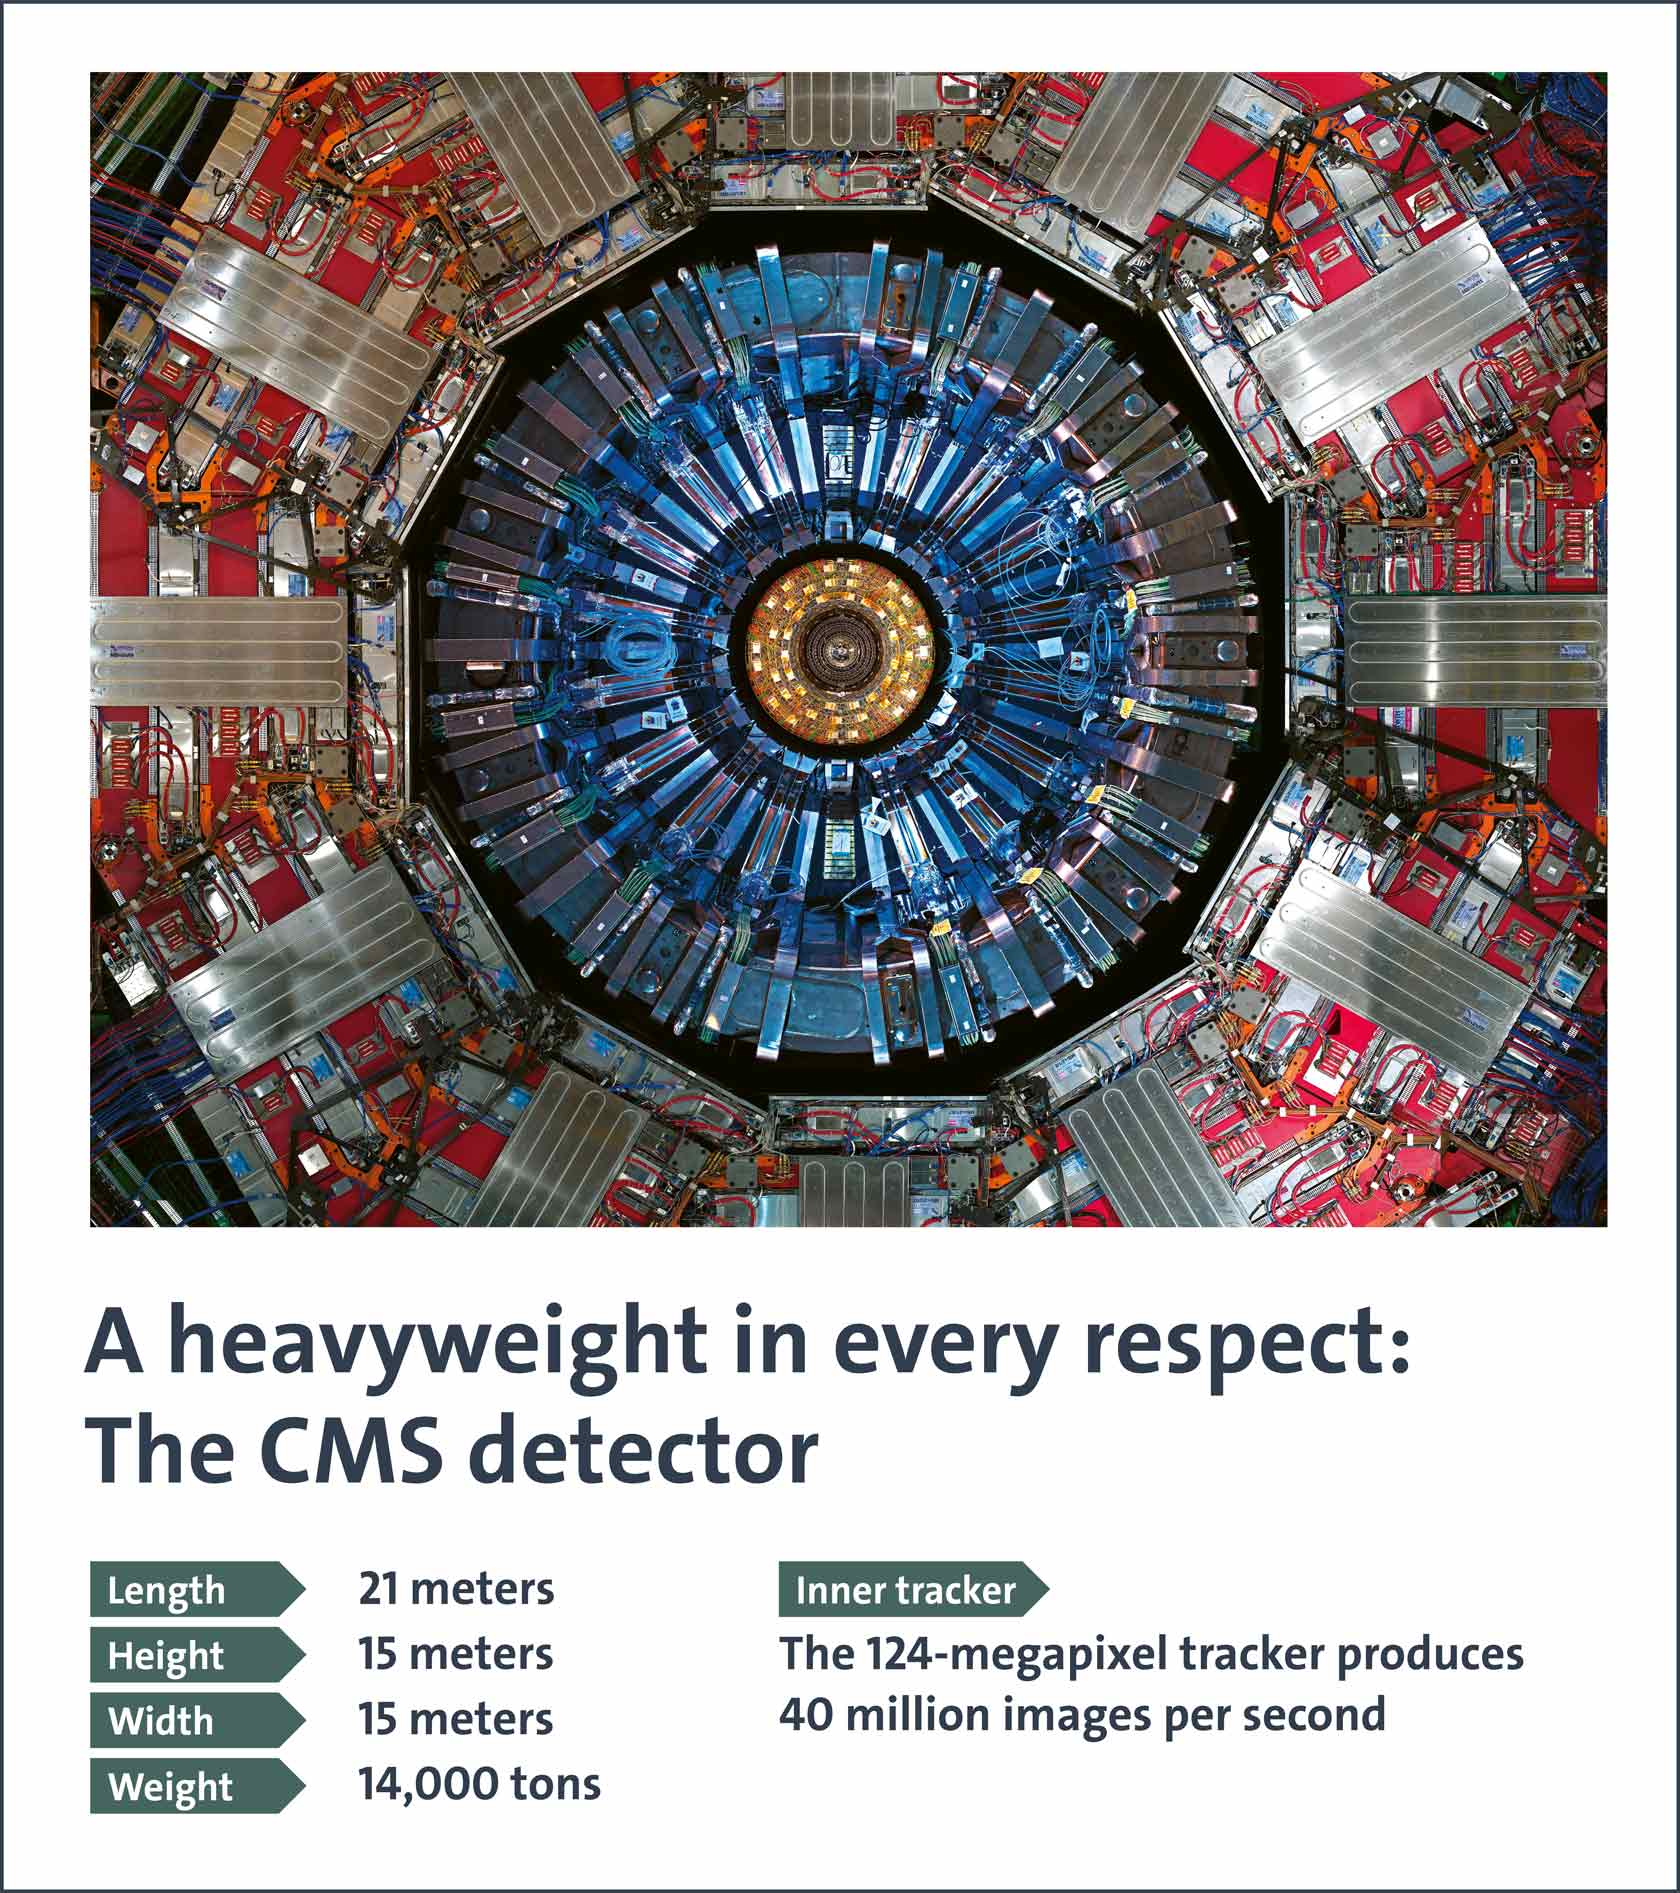 A heavyweight in every respect: The CMS detector: 21 meters length, 15 meters height and 14,000 tons weight and the 124-megapixel tracker produces 40 million images per second